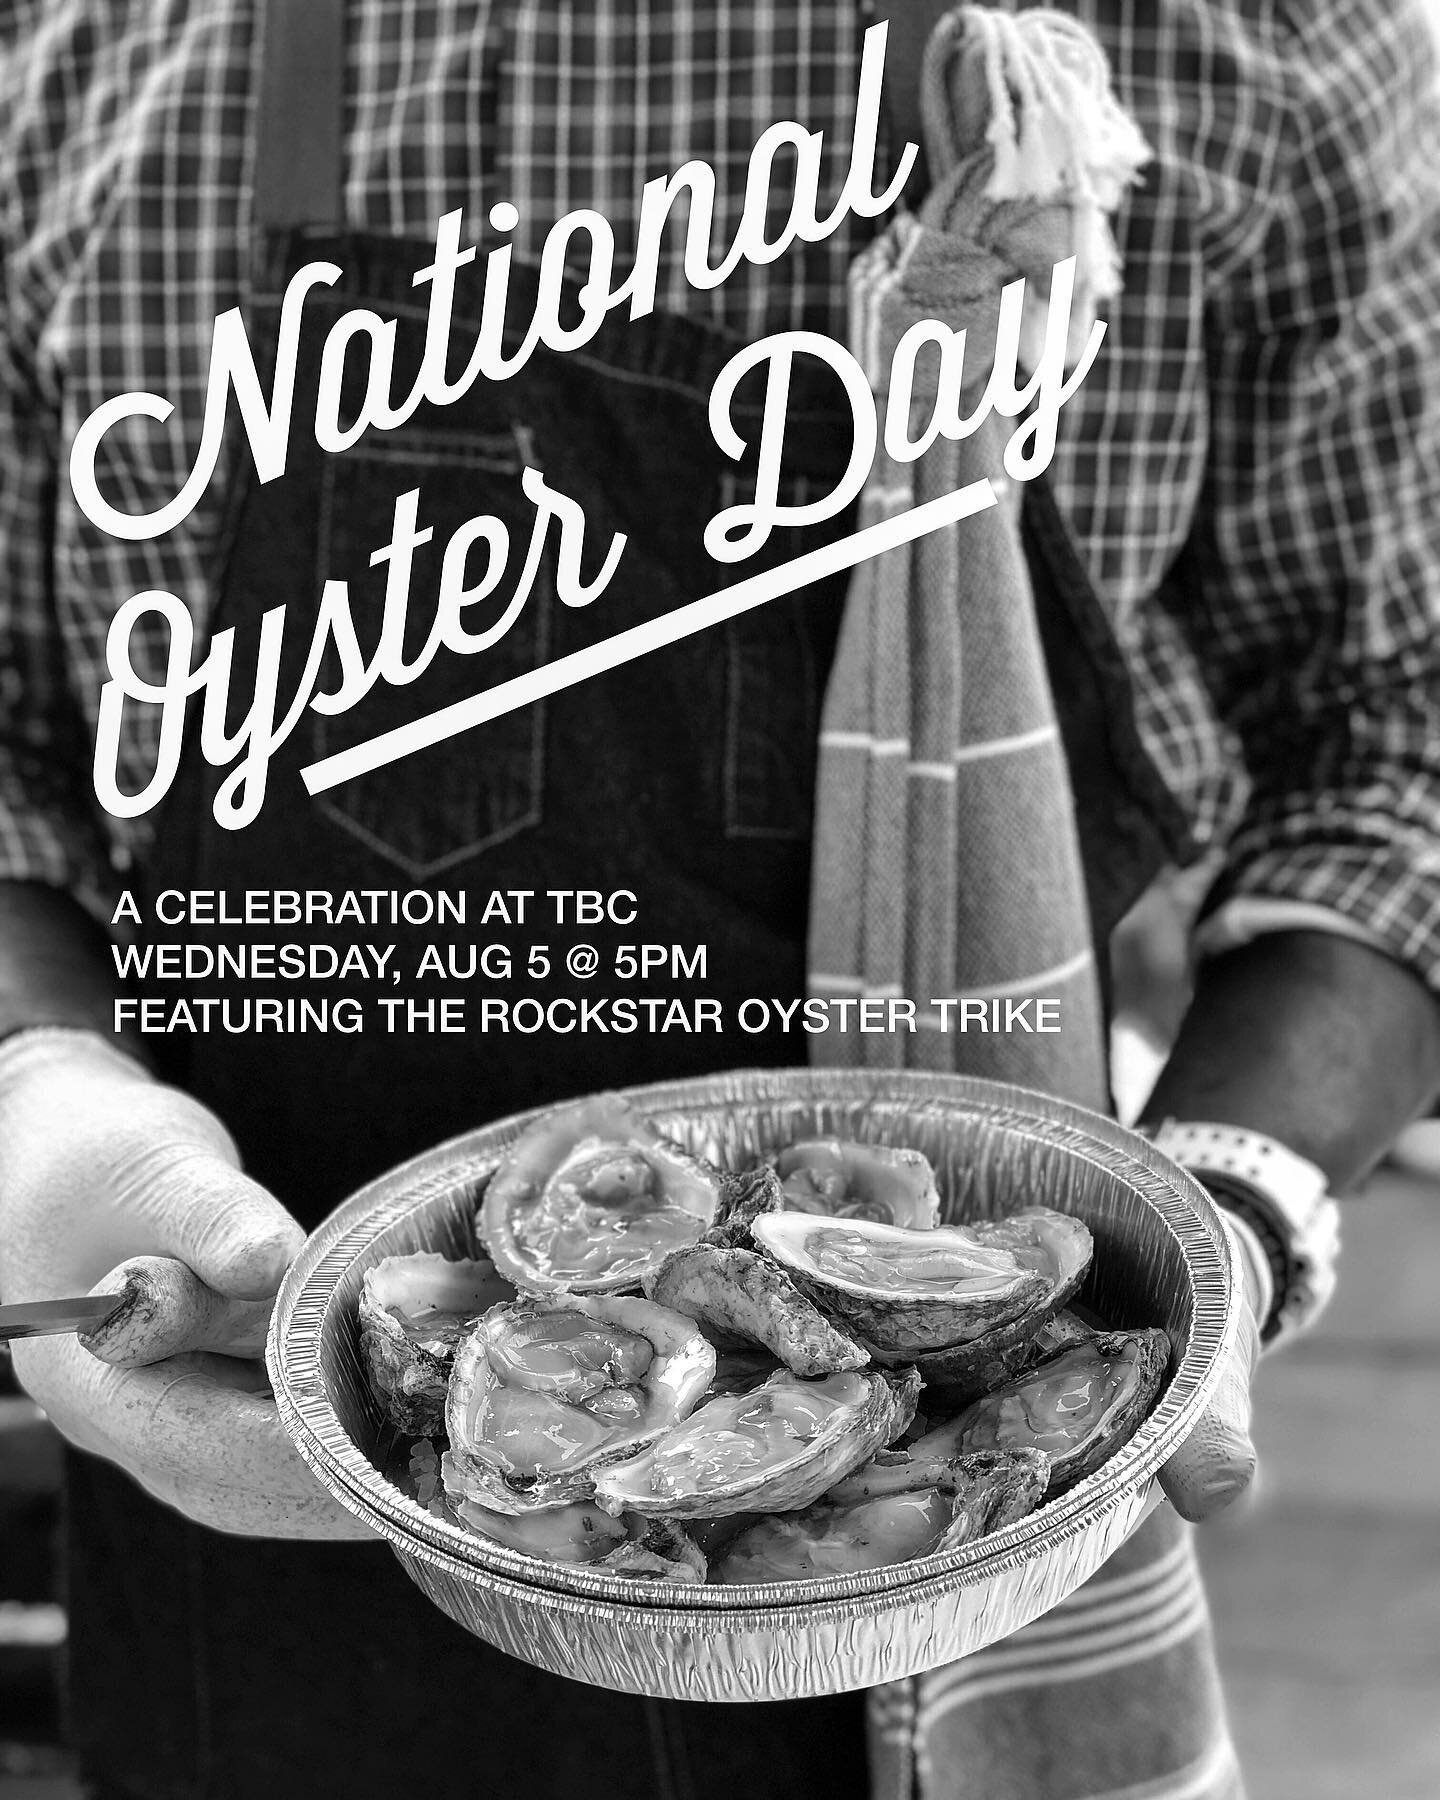 mark your calendars - pop up oyster night this wednesday for #nationaloysterday!
the #rockstaroystertrike is riding on over to @tequestabrewingcompany for another pop up oyster shuck aug 5th from 5-7. they go quickly, so come early! 🚲